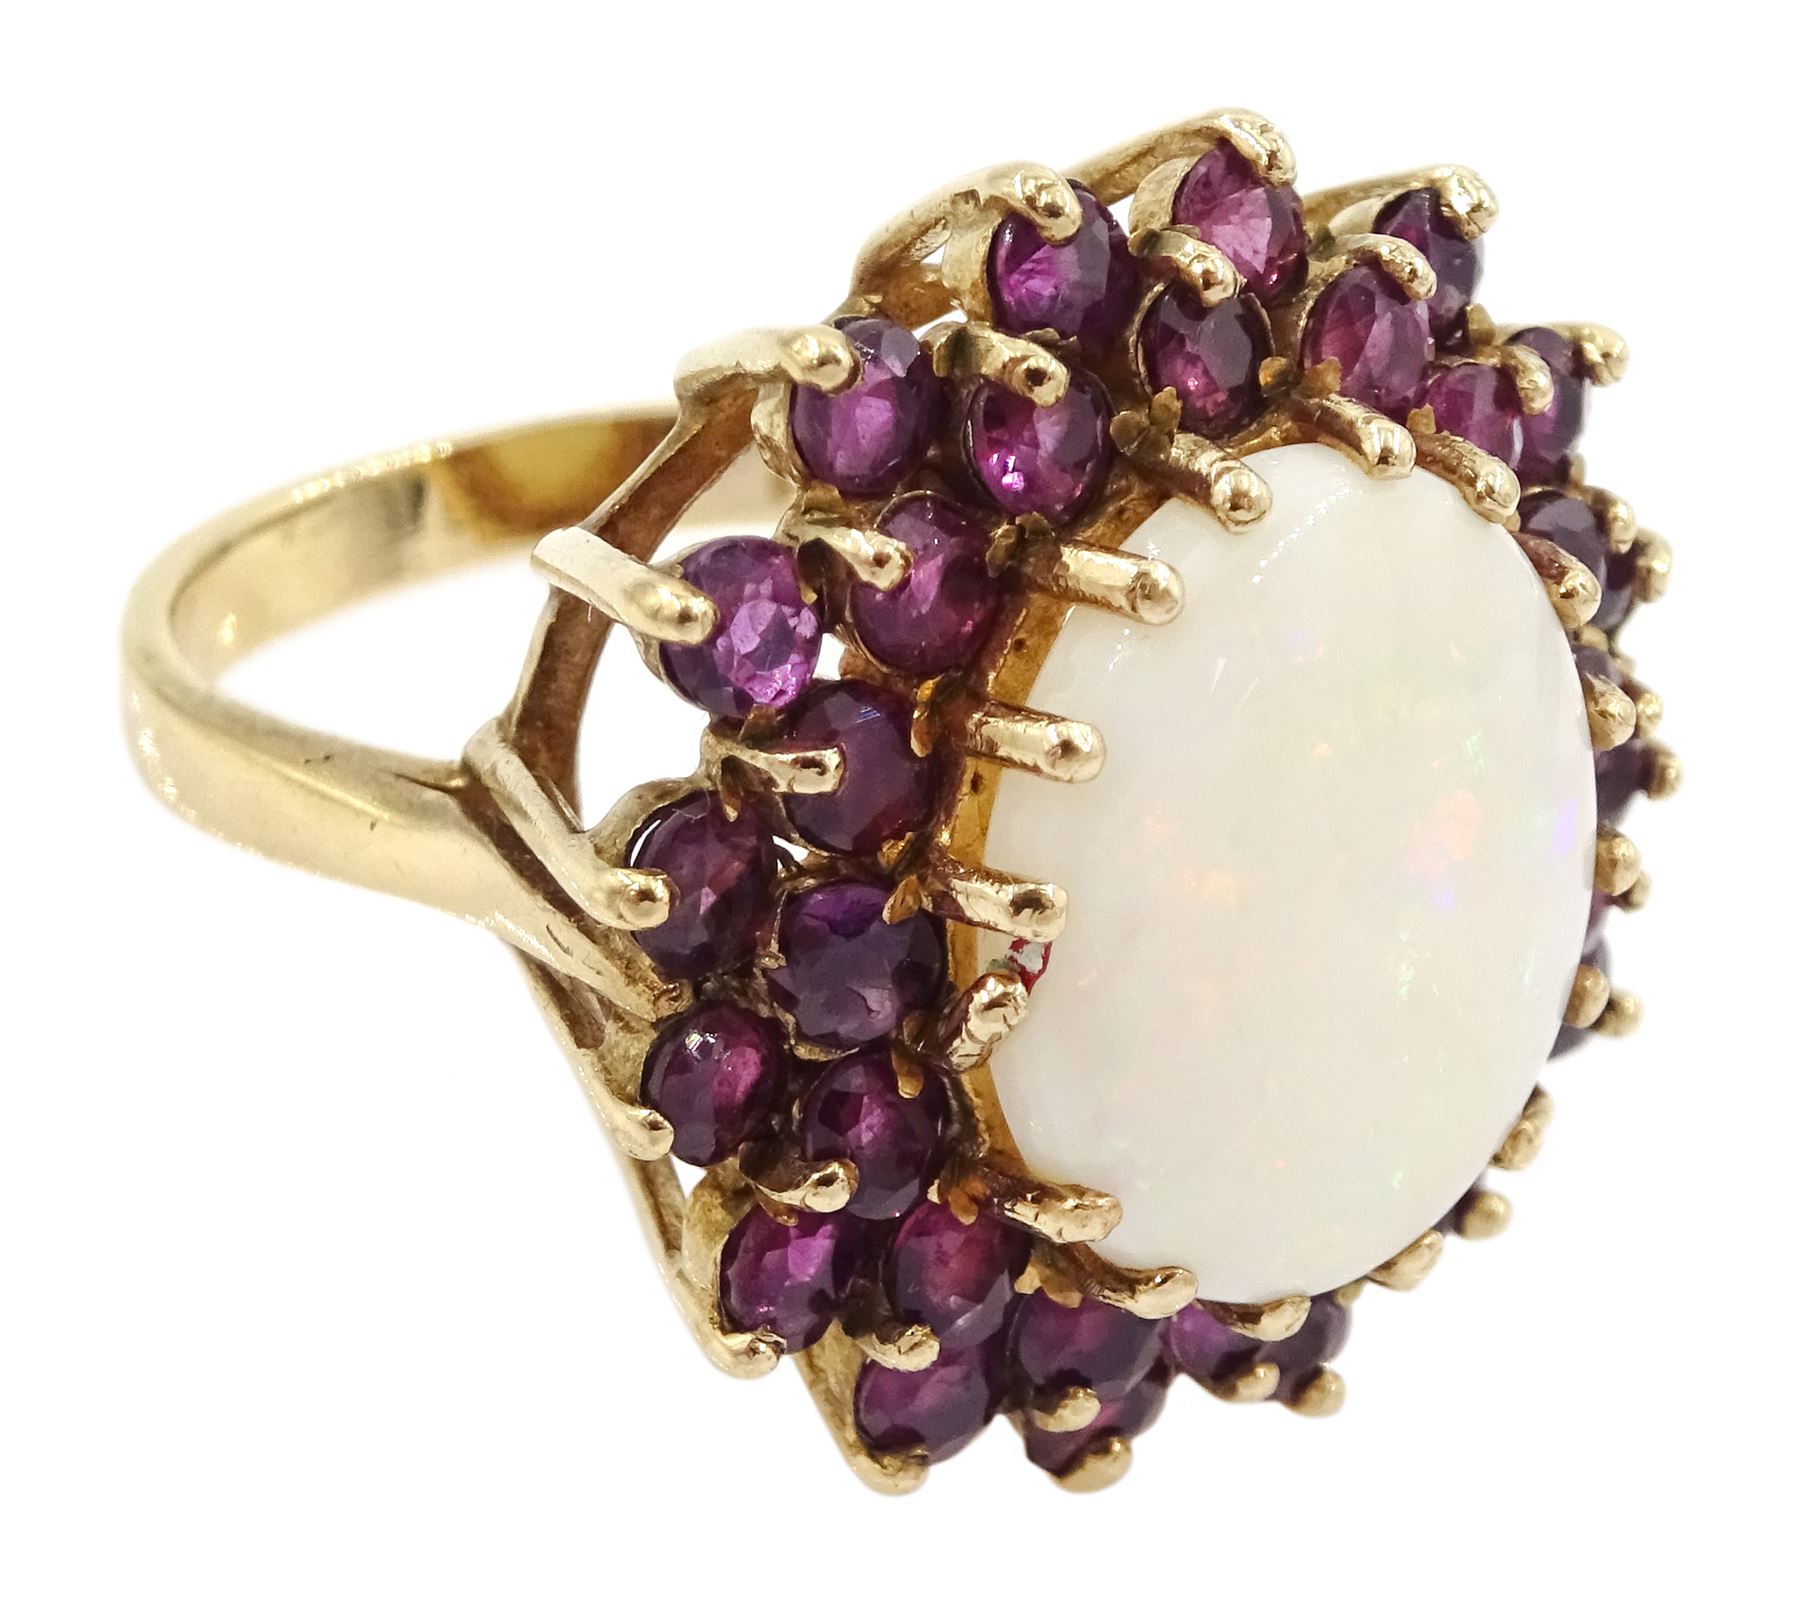 9ct gold opal and garnet cluster ring - Image 3 of 4